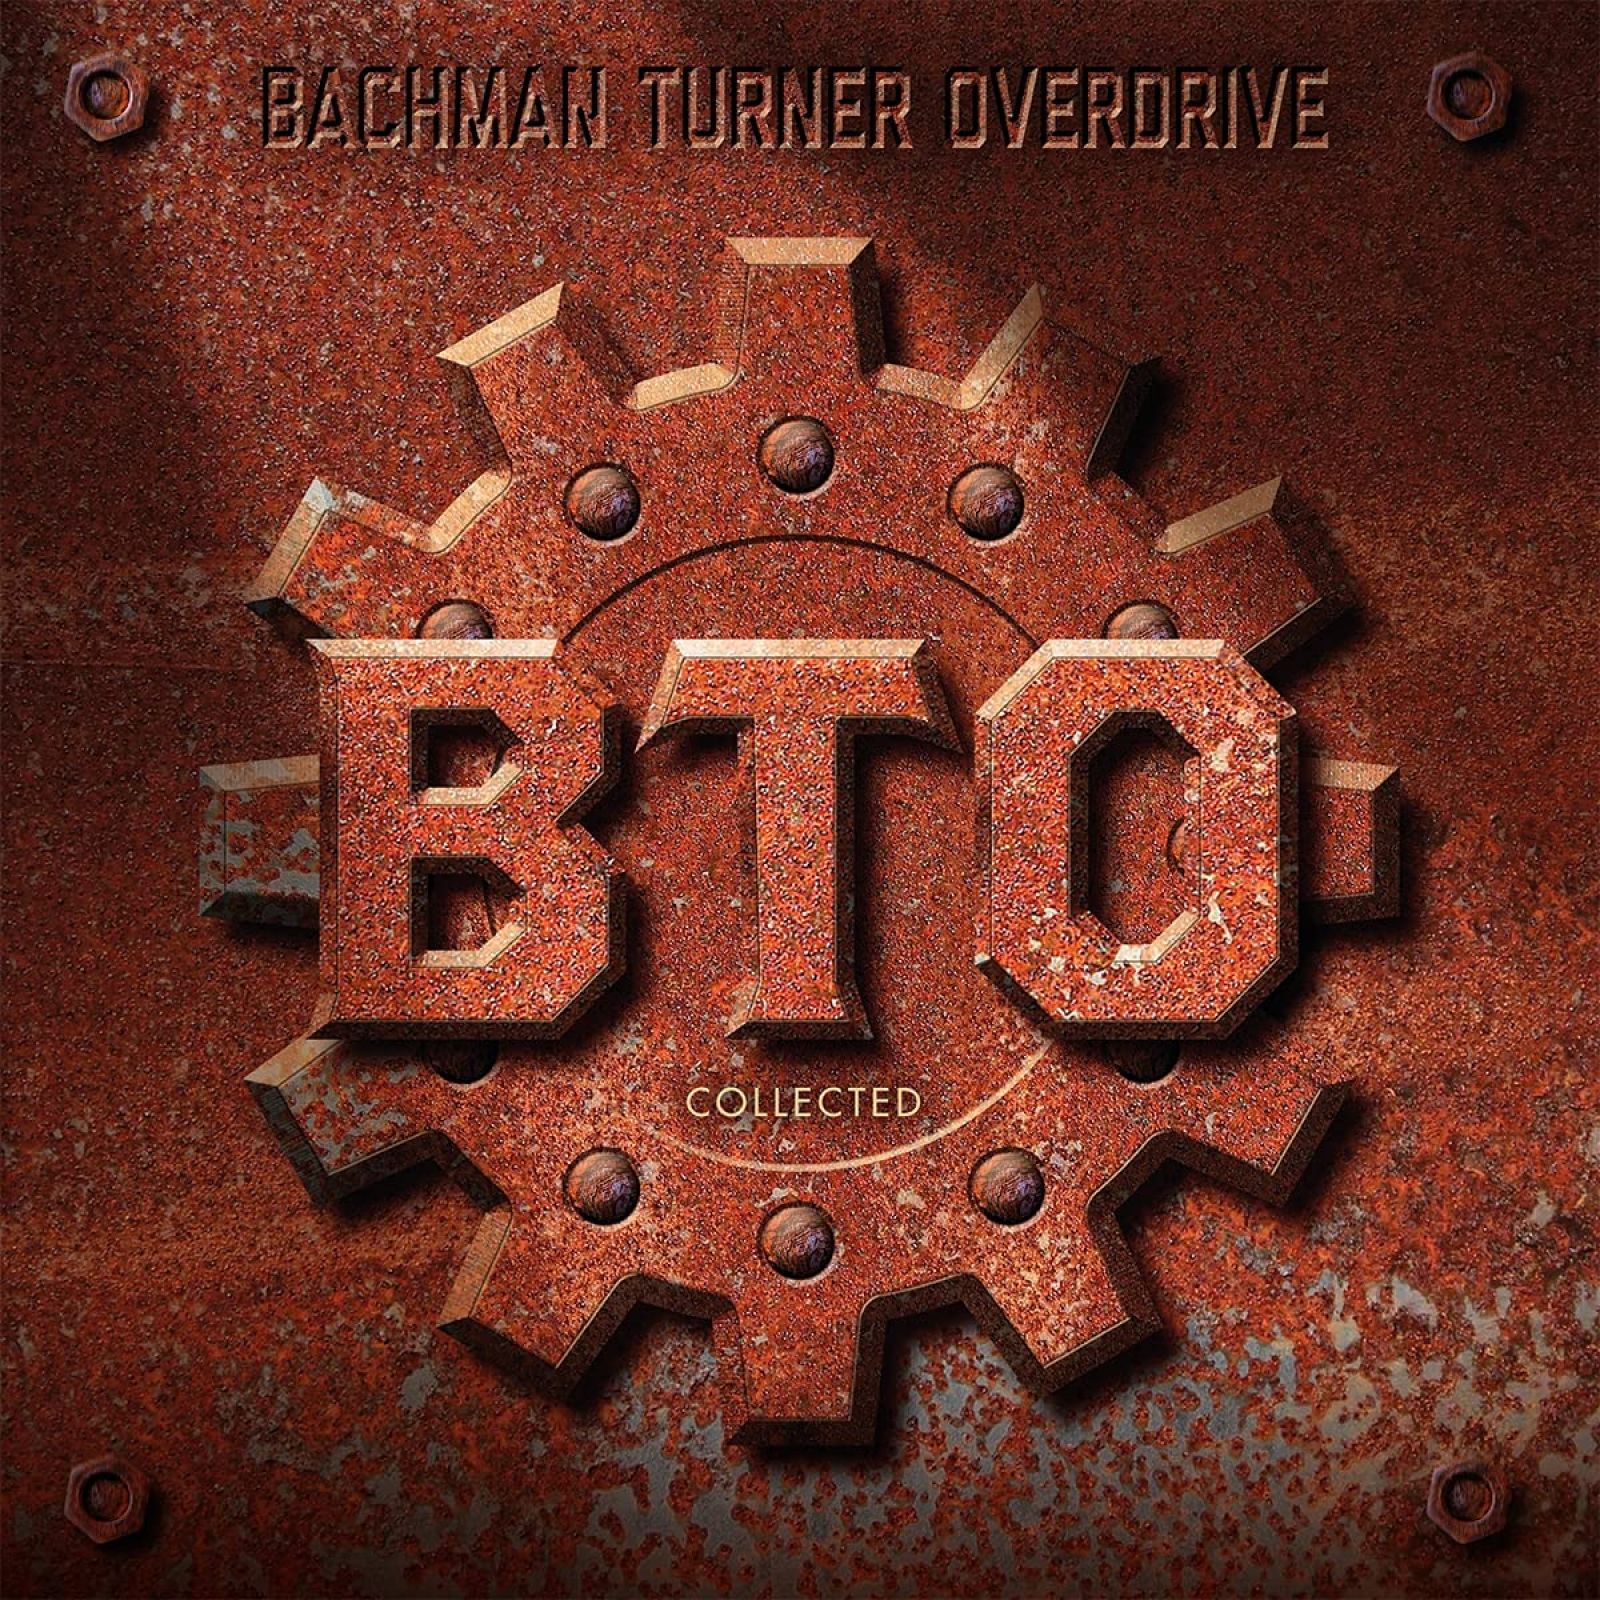 bachman turner overdrive collected [gatefold 180 gram black vinyl] [pvc protective sleeve] Виниловая пластинка Bachman Turner Overdrive, Collected: Greatest Songs (0600753911327)